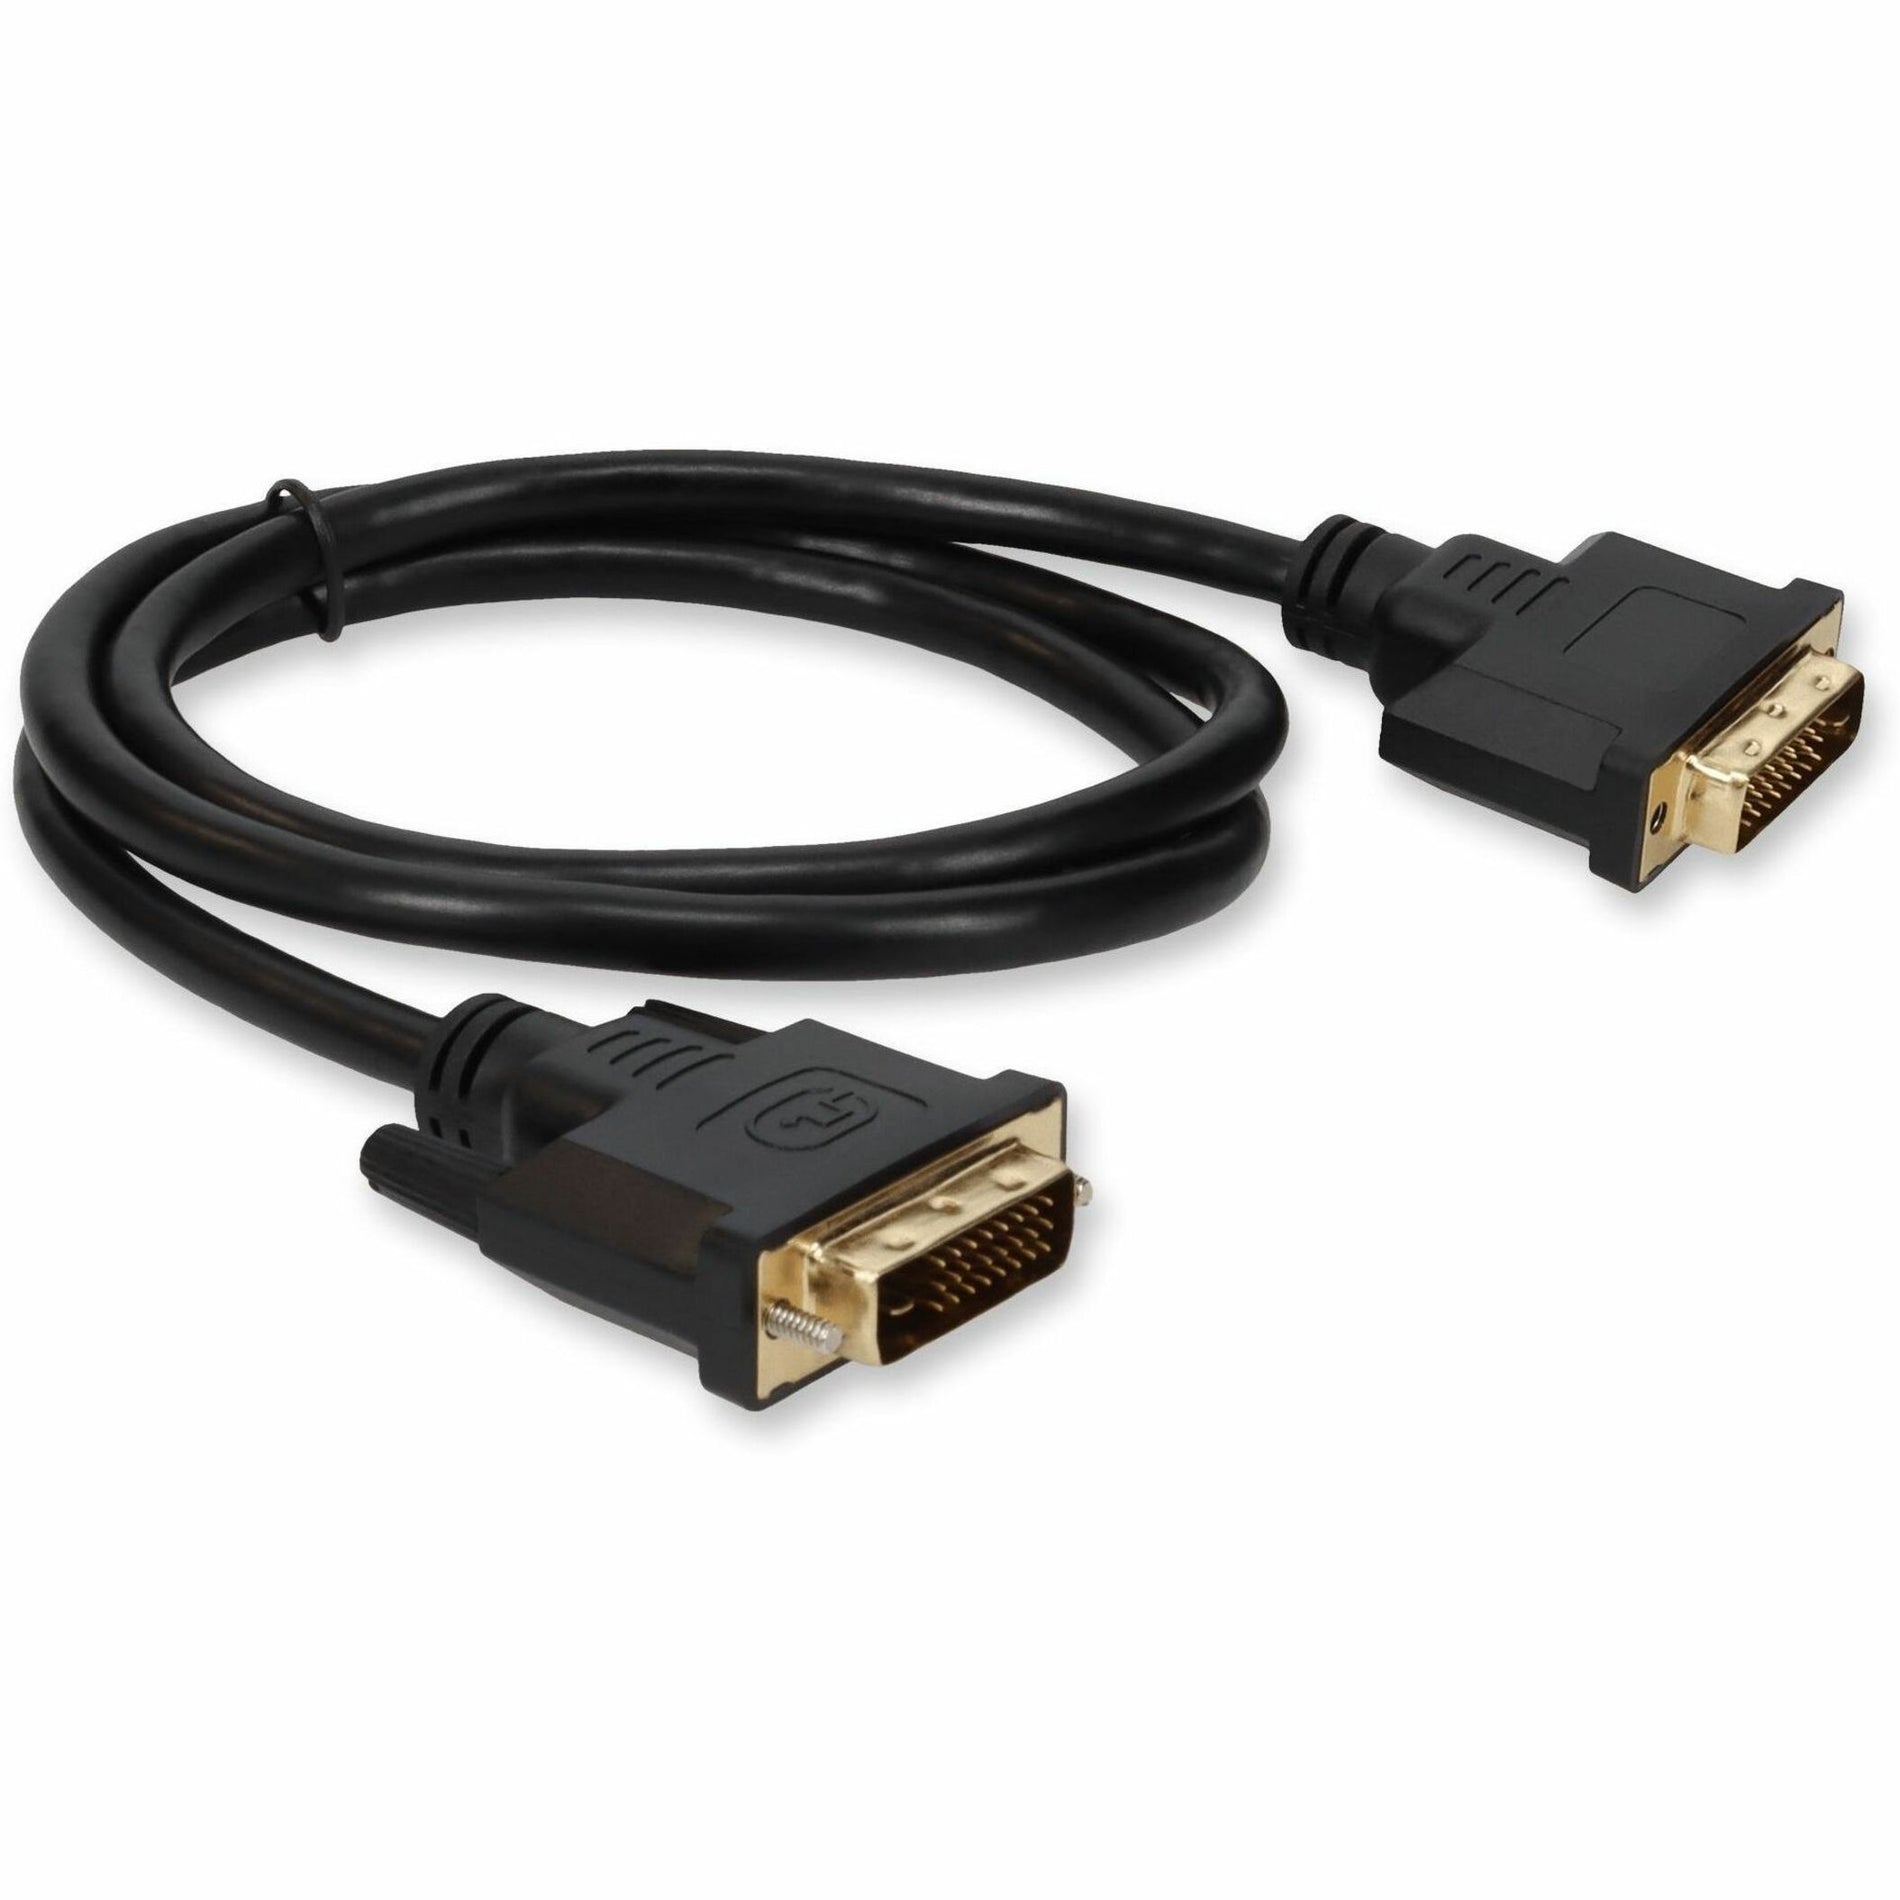 AddOn DVID2DVIDDL10F 10ft (3M) DVI-D to DVI-D Dual Link Cable - Male to Male, High-Quality Video Transmission